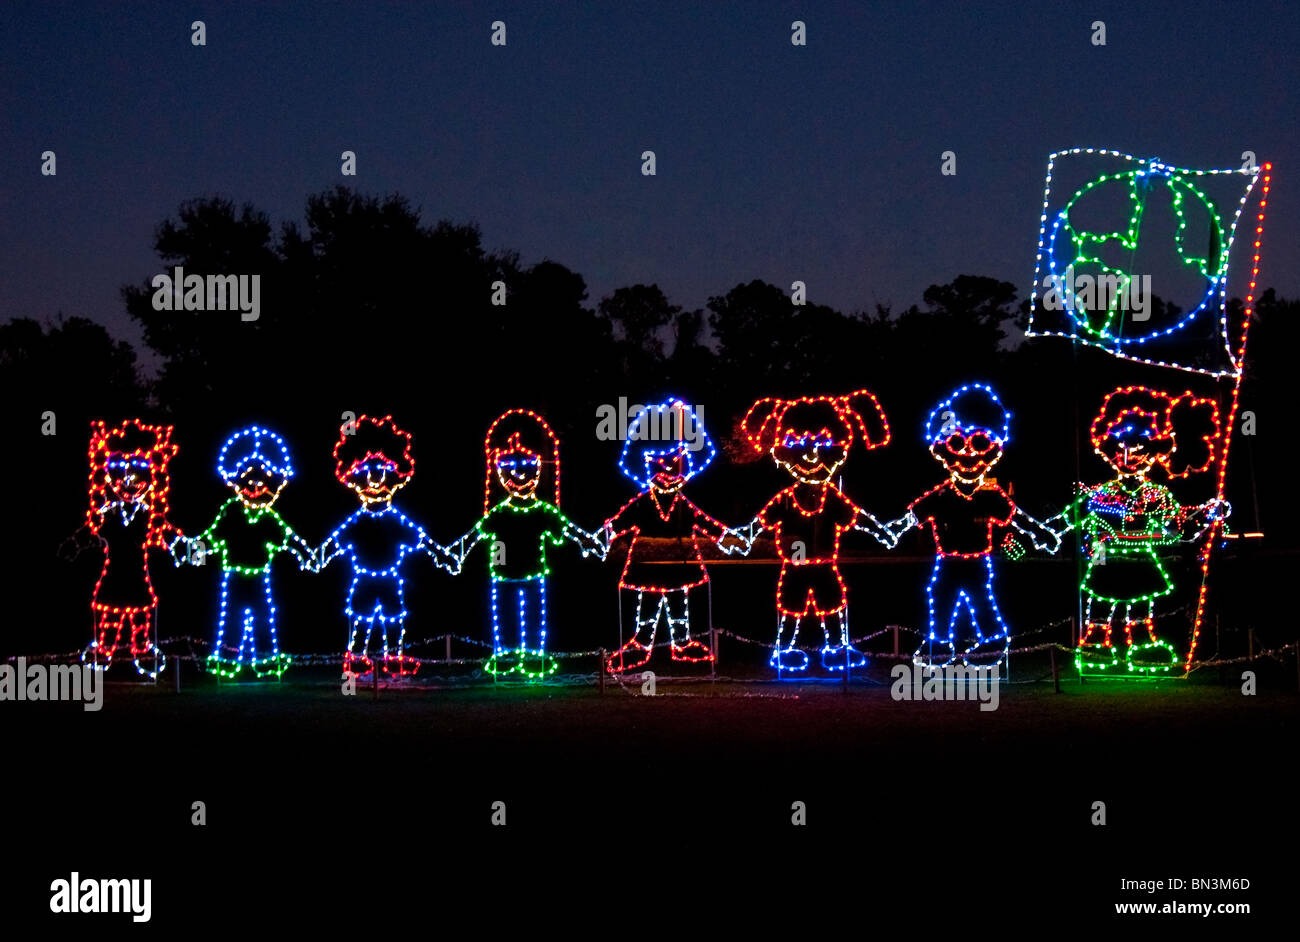 Christmas lighting display in a city park in Largo, Florida, USA Stock Photo